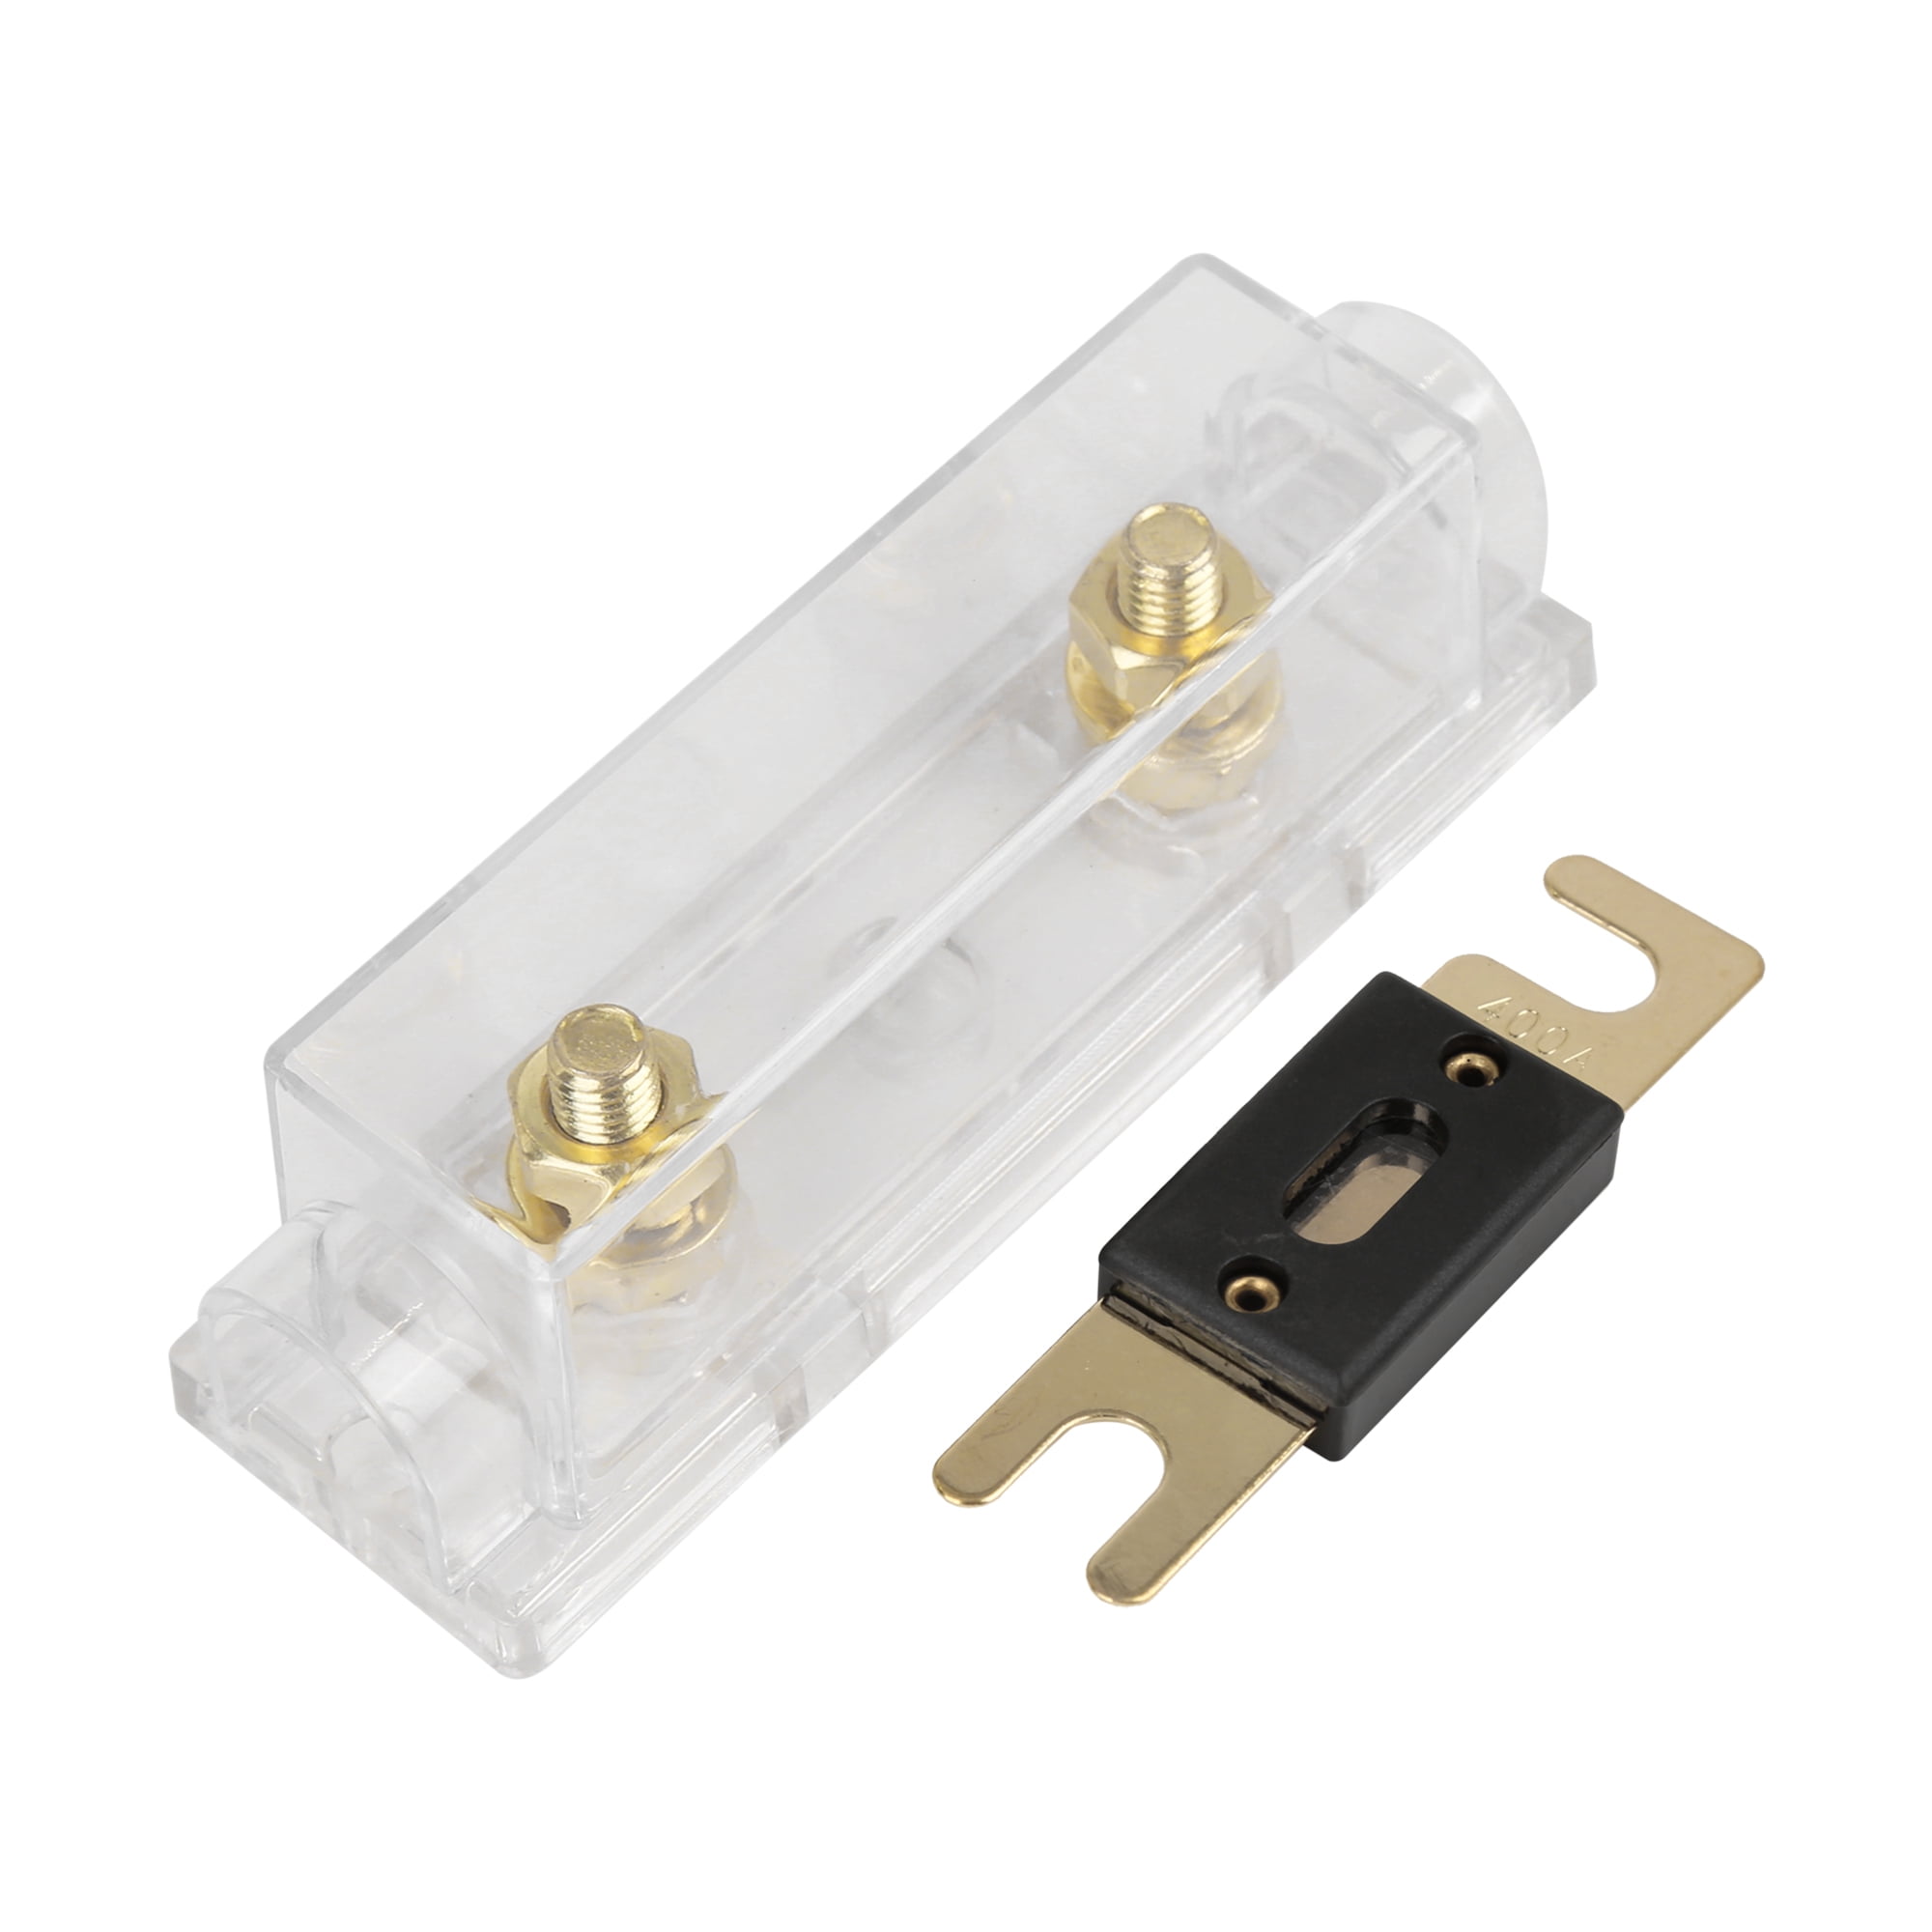 Details about   ANL-400A Electrical Protection Fuse Amp With Holder 1 Pack 